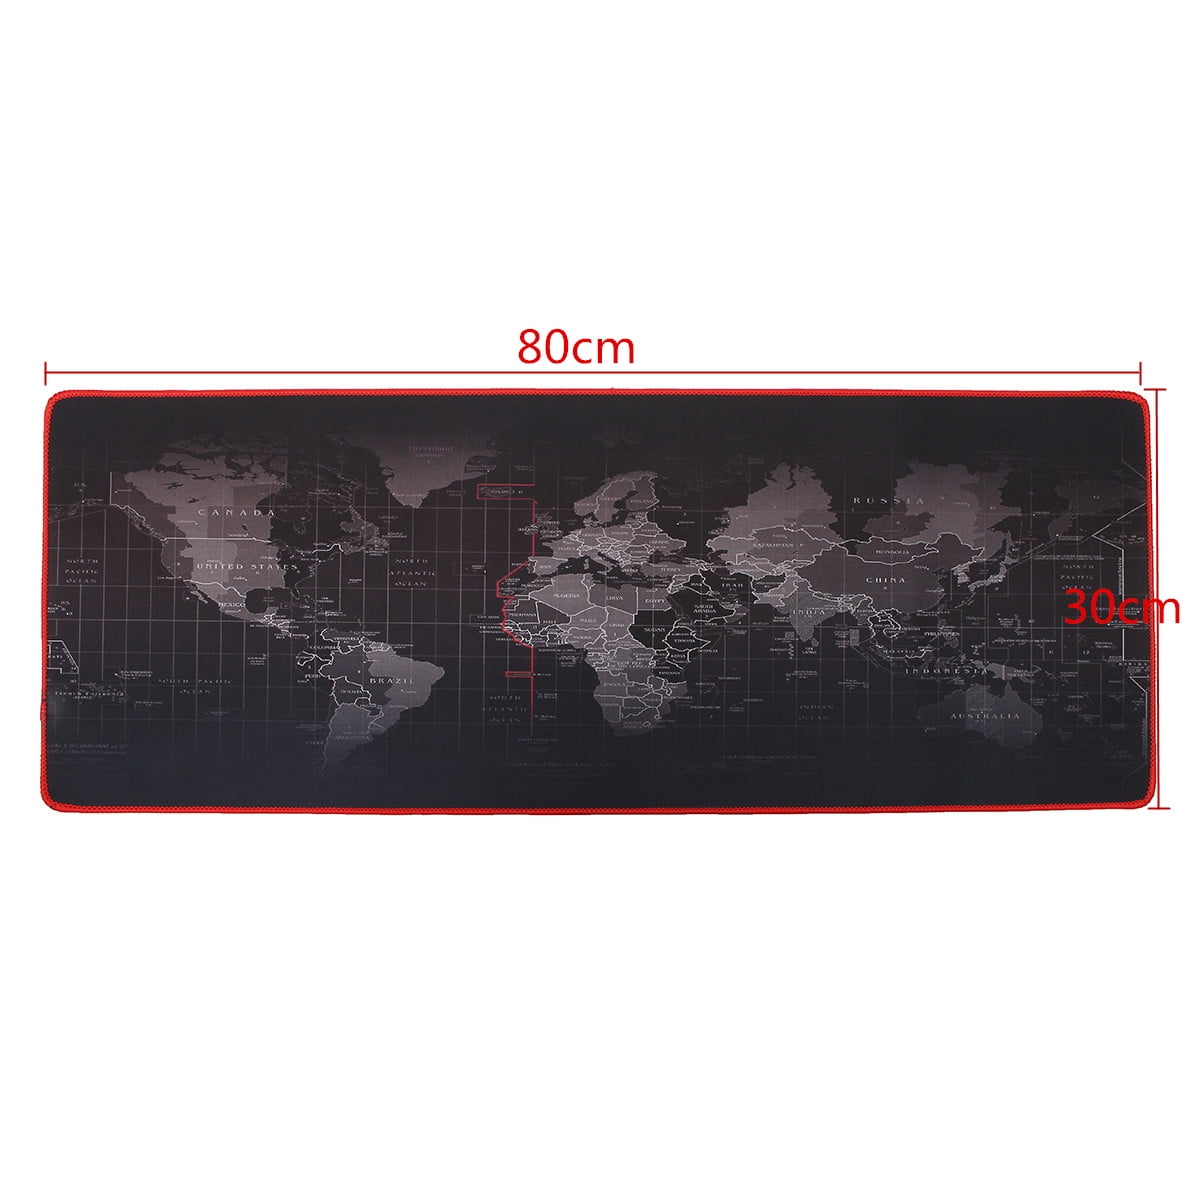 11.81X31.50 Mouse Pads RGB Mouse Pad Gamer Computer Backlit Gaming Large XXL for Desk Keyboard LED Mat Size 3